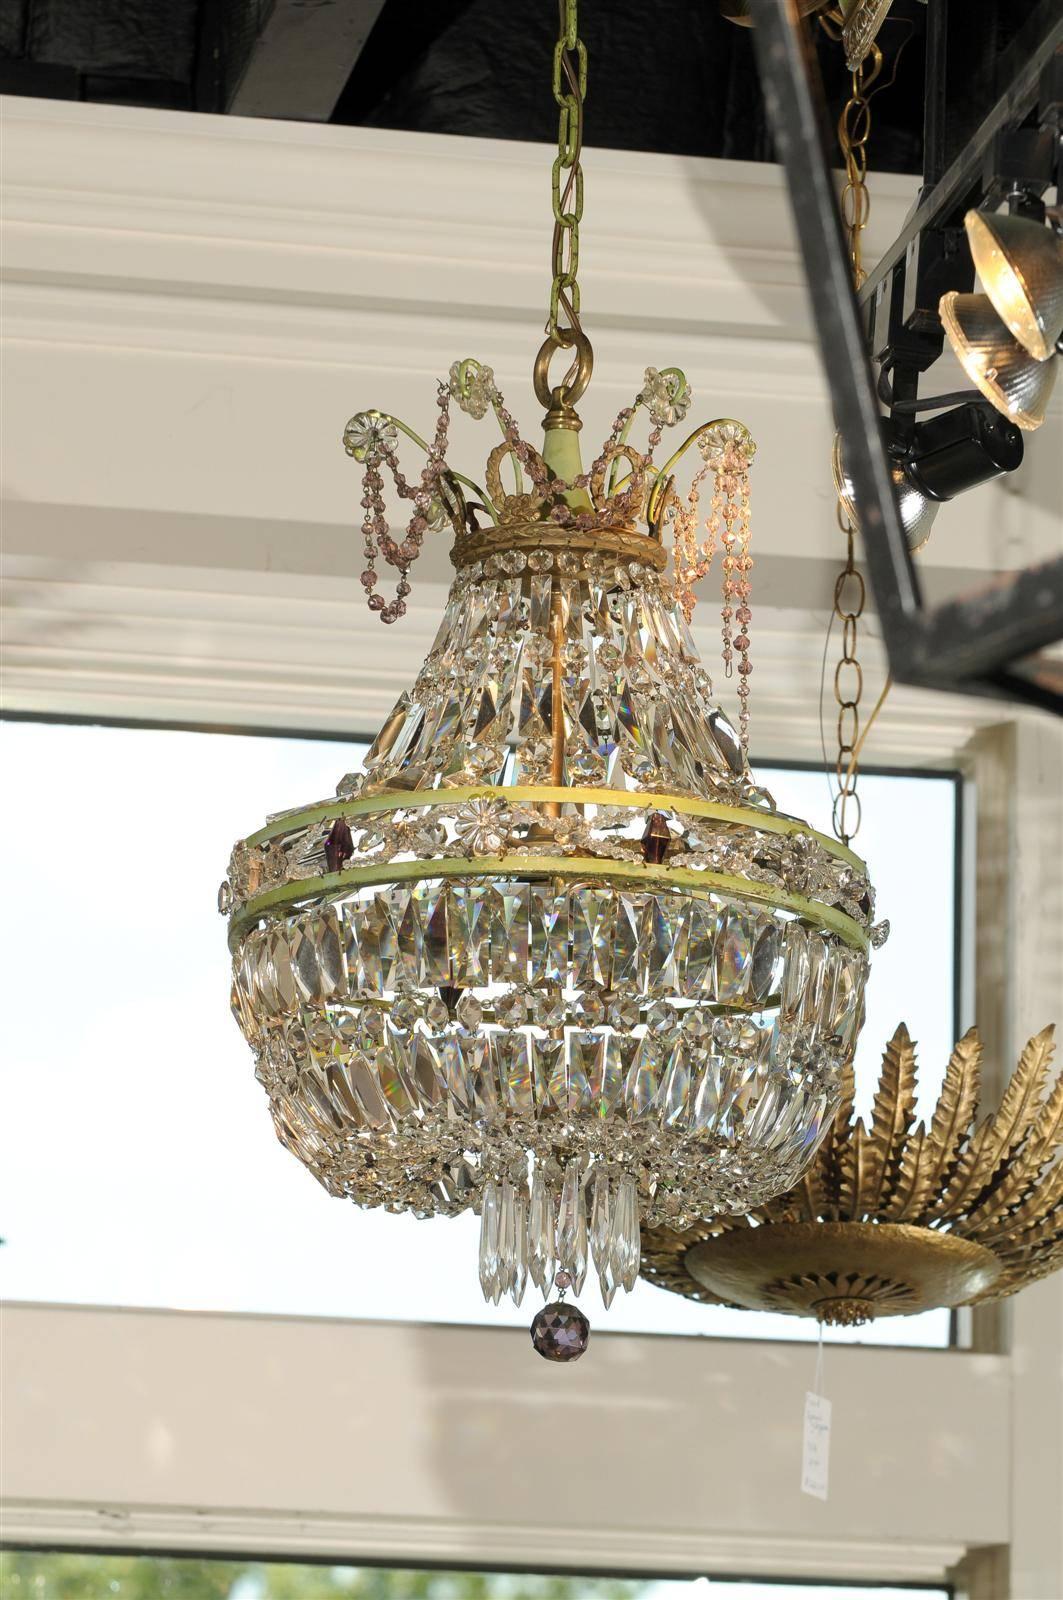 This petite French crystal chandelier from the mid 20th century features a lovely basket shape. Reminiscent of the Empire taste, the chandelier is made of a metal double ring adorned with diamond shaped crystals of amethyst color. The crystals give